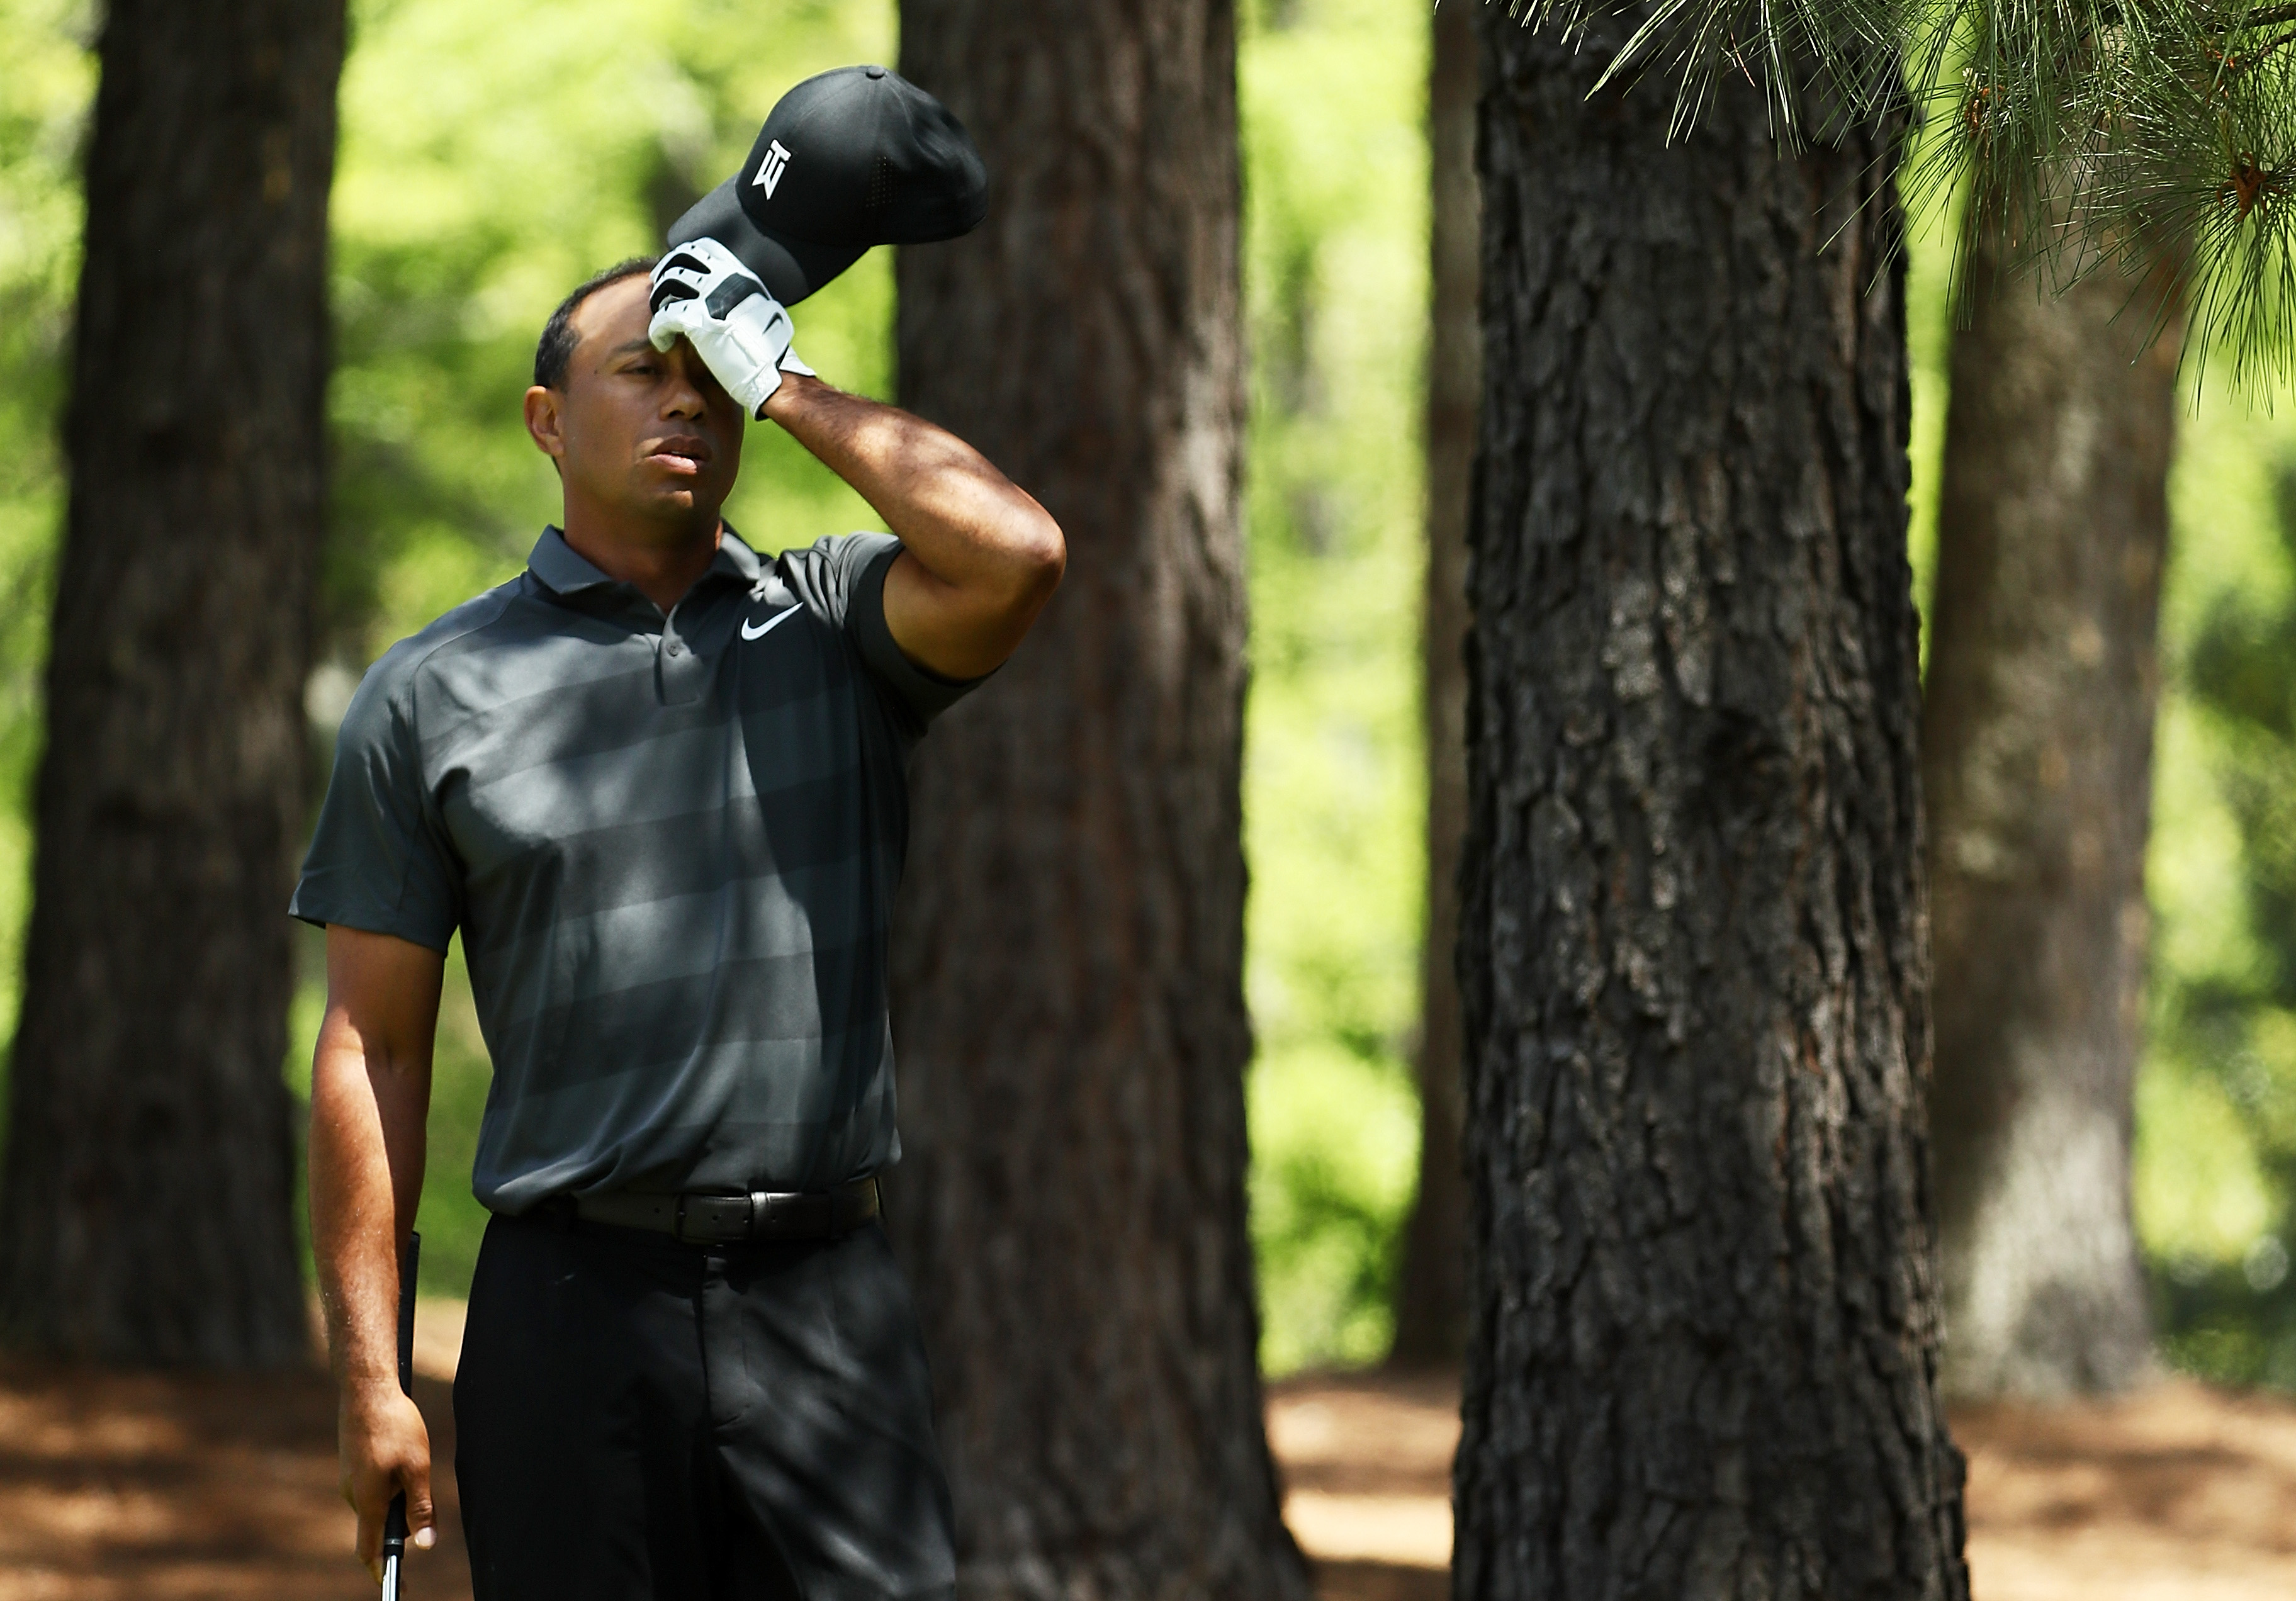 Tiger Woods opens with 1-over 73 at Masters